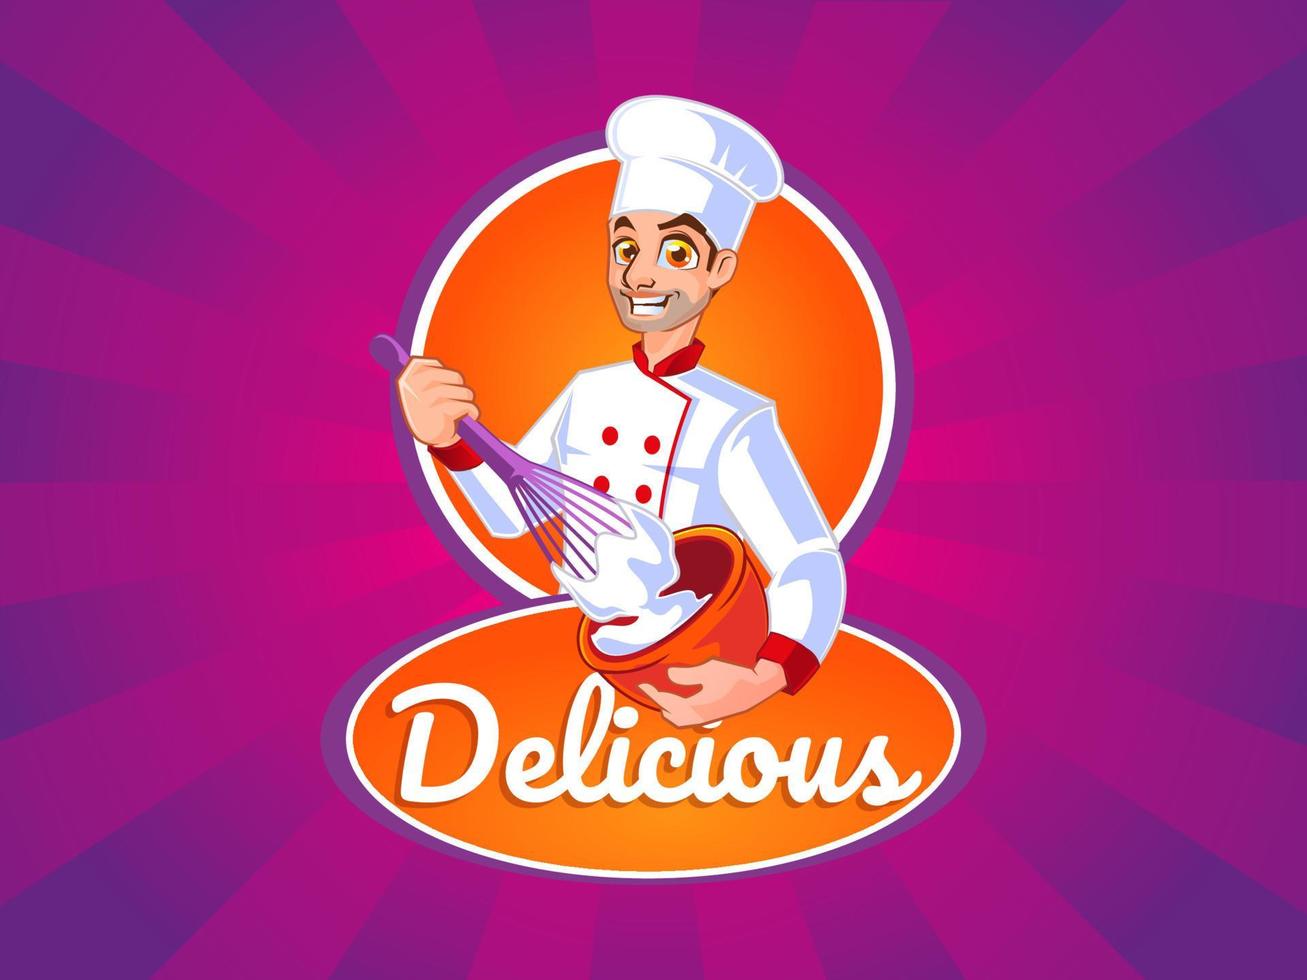 Bakery logo with chef mascot vector